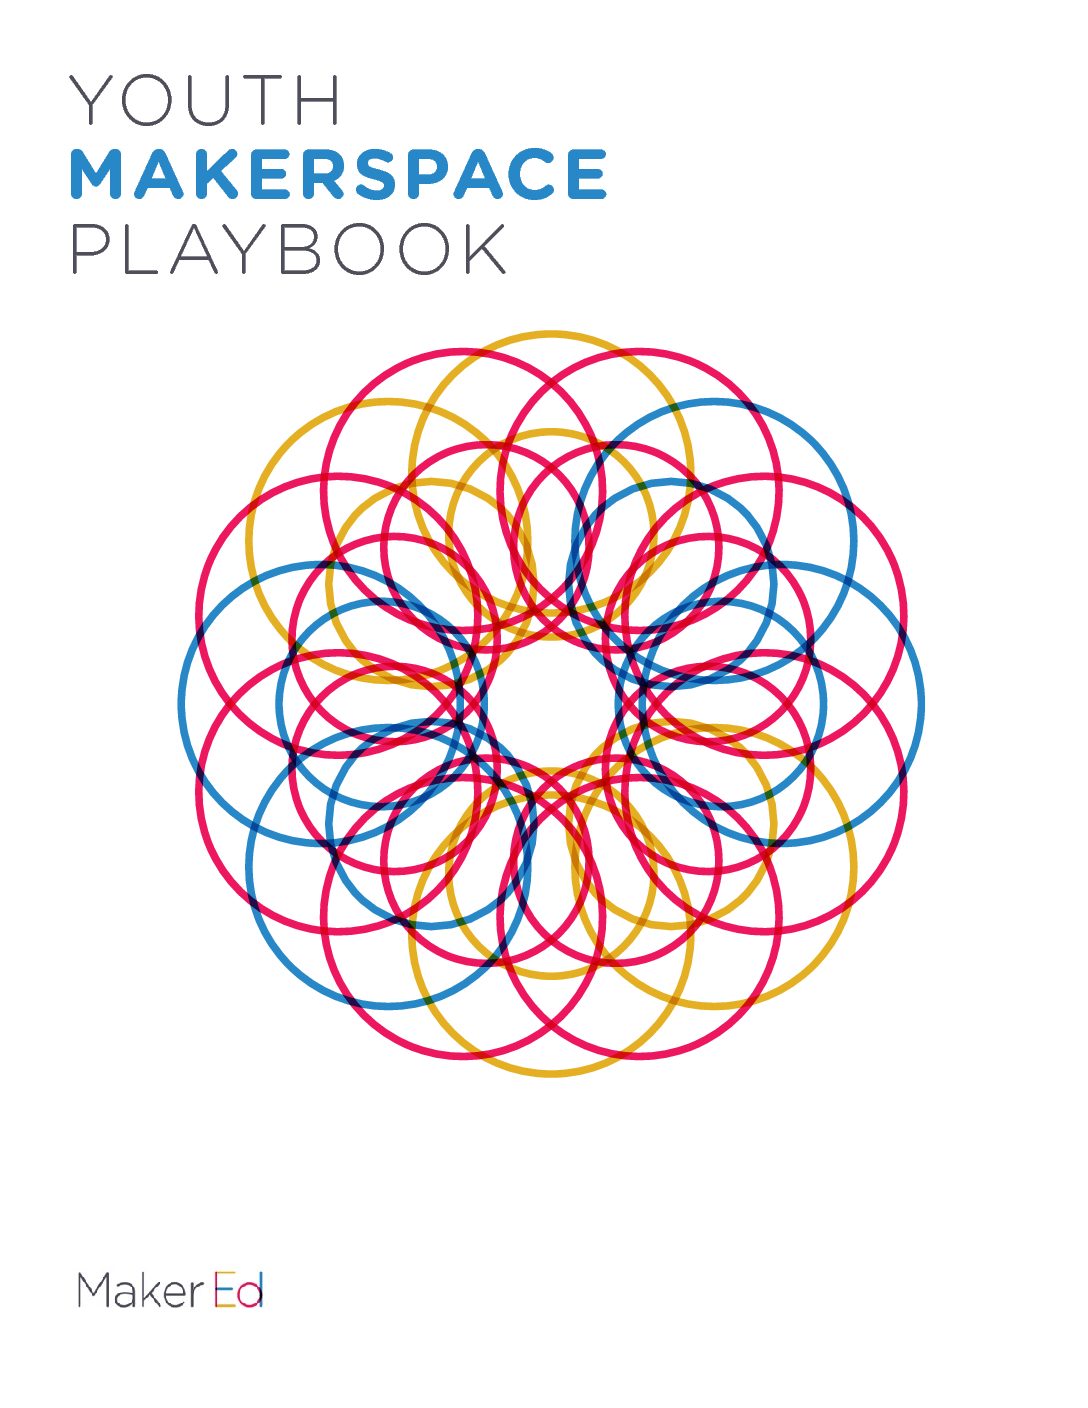 Youth MakerSpace Playbook